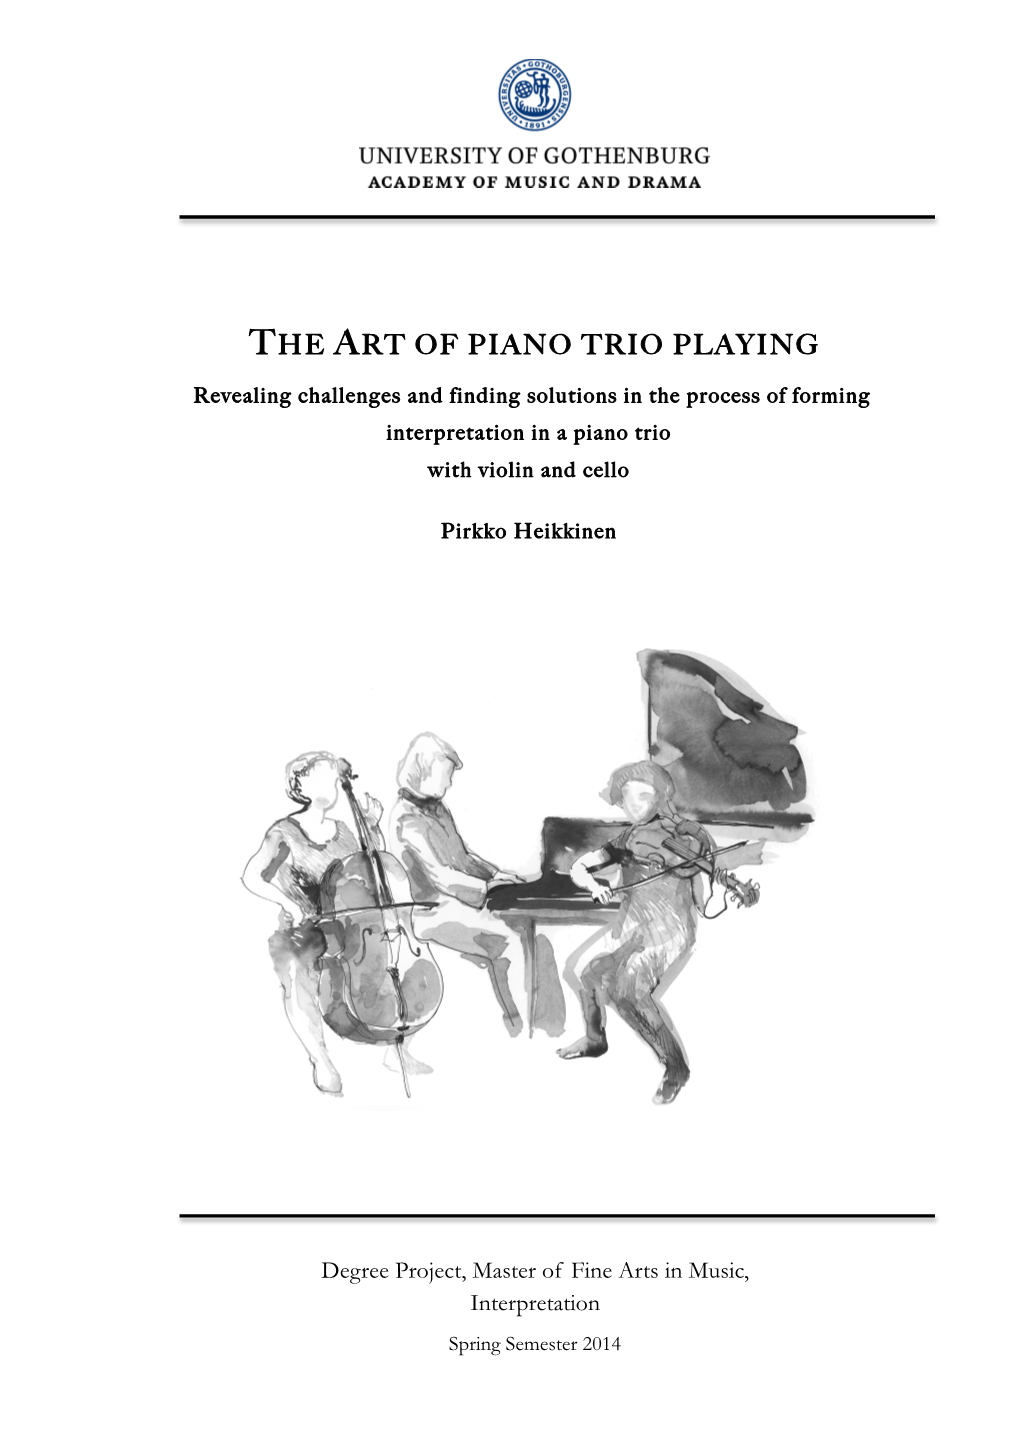 The Art of Piano Trio Playing